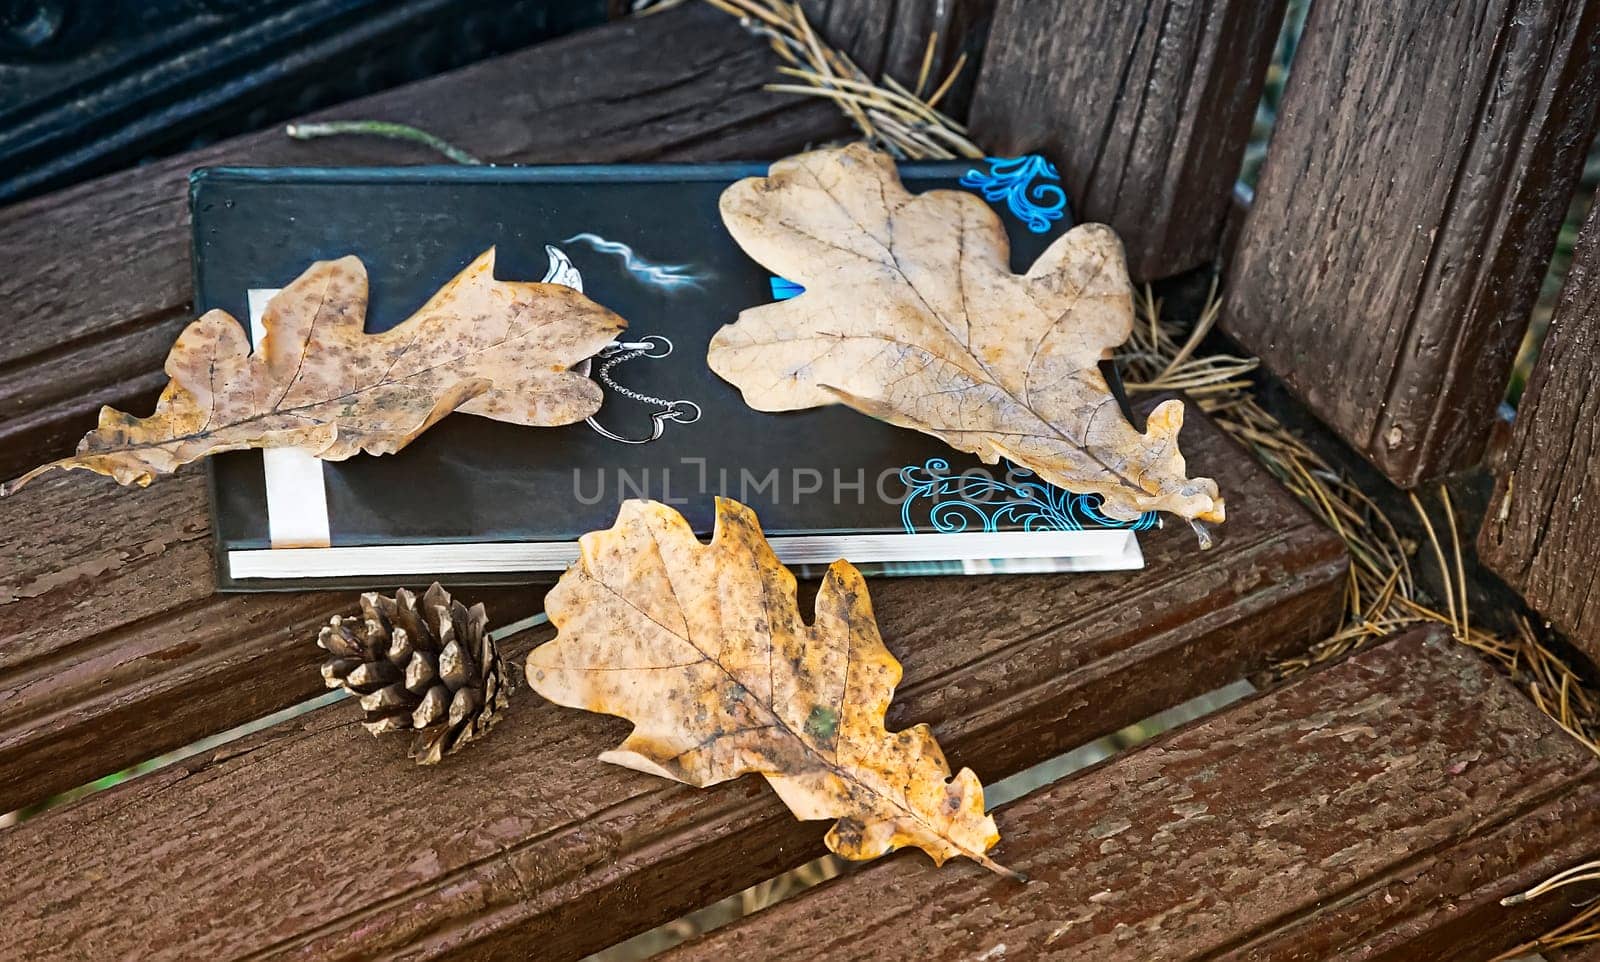 On a wooden bench in the Park book and yellow fallen autumn oak leaves.